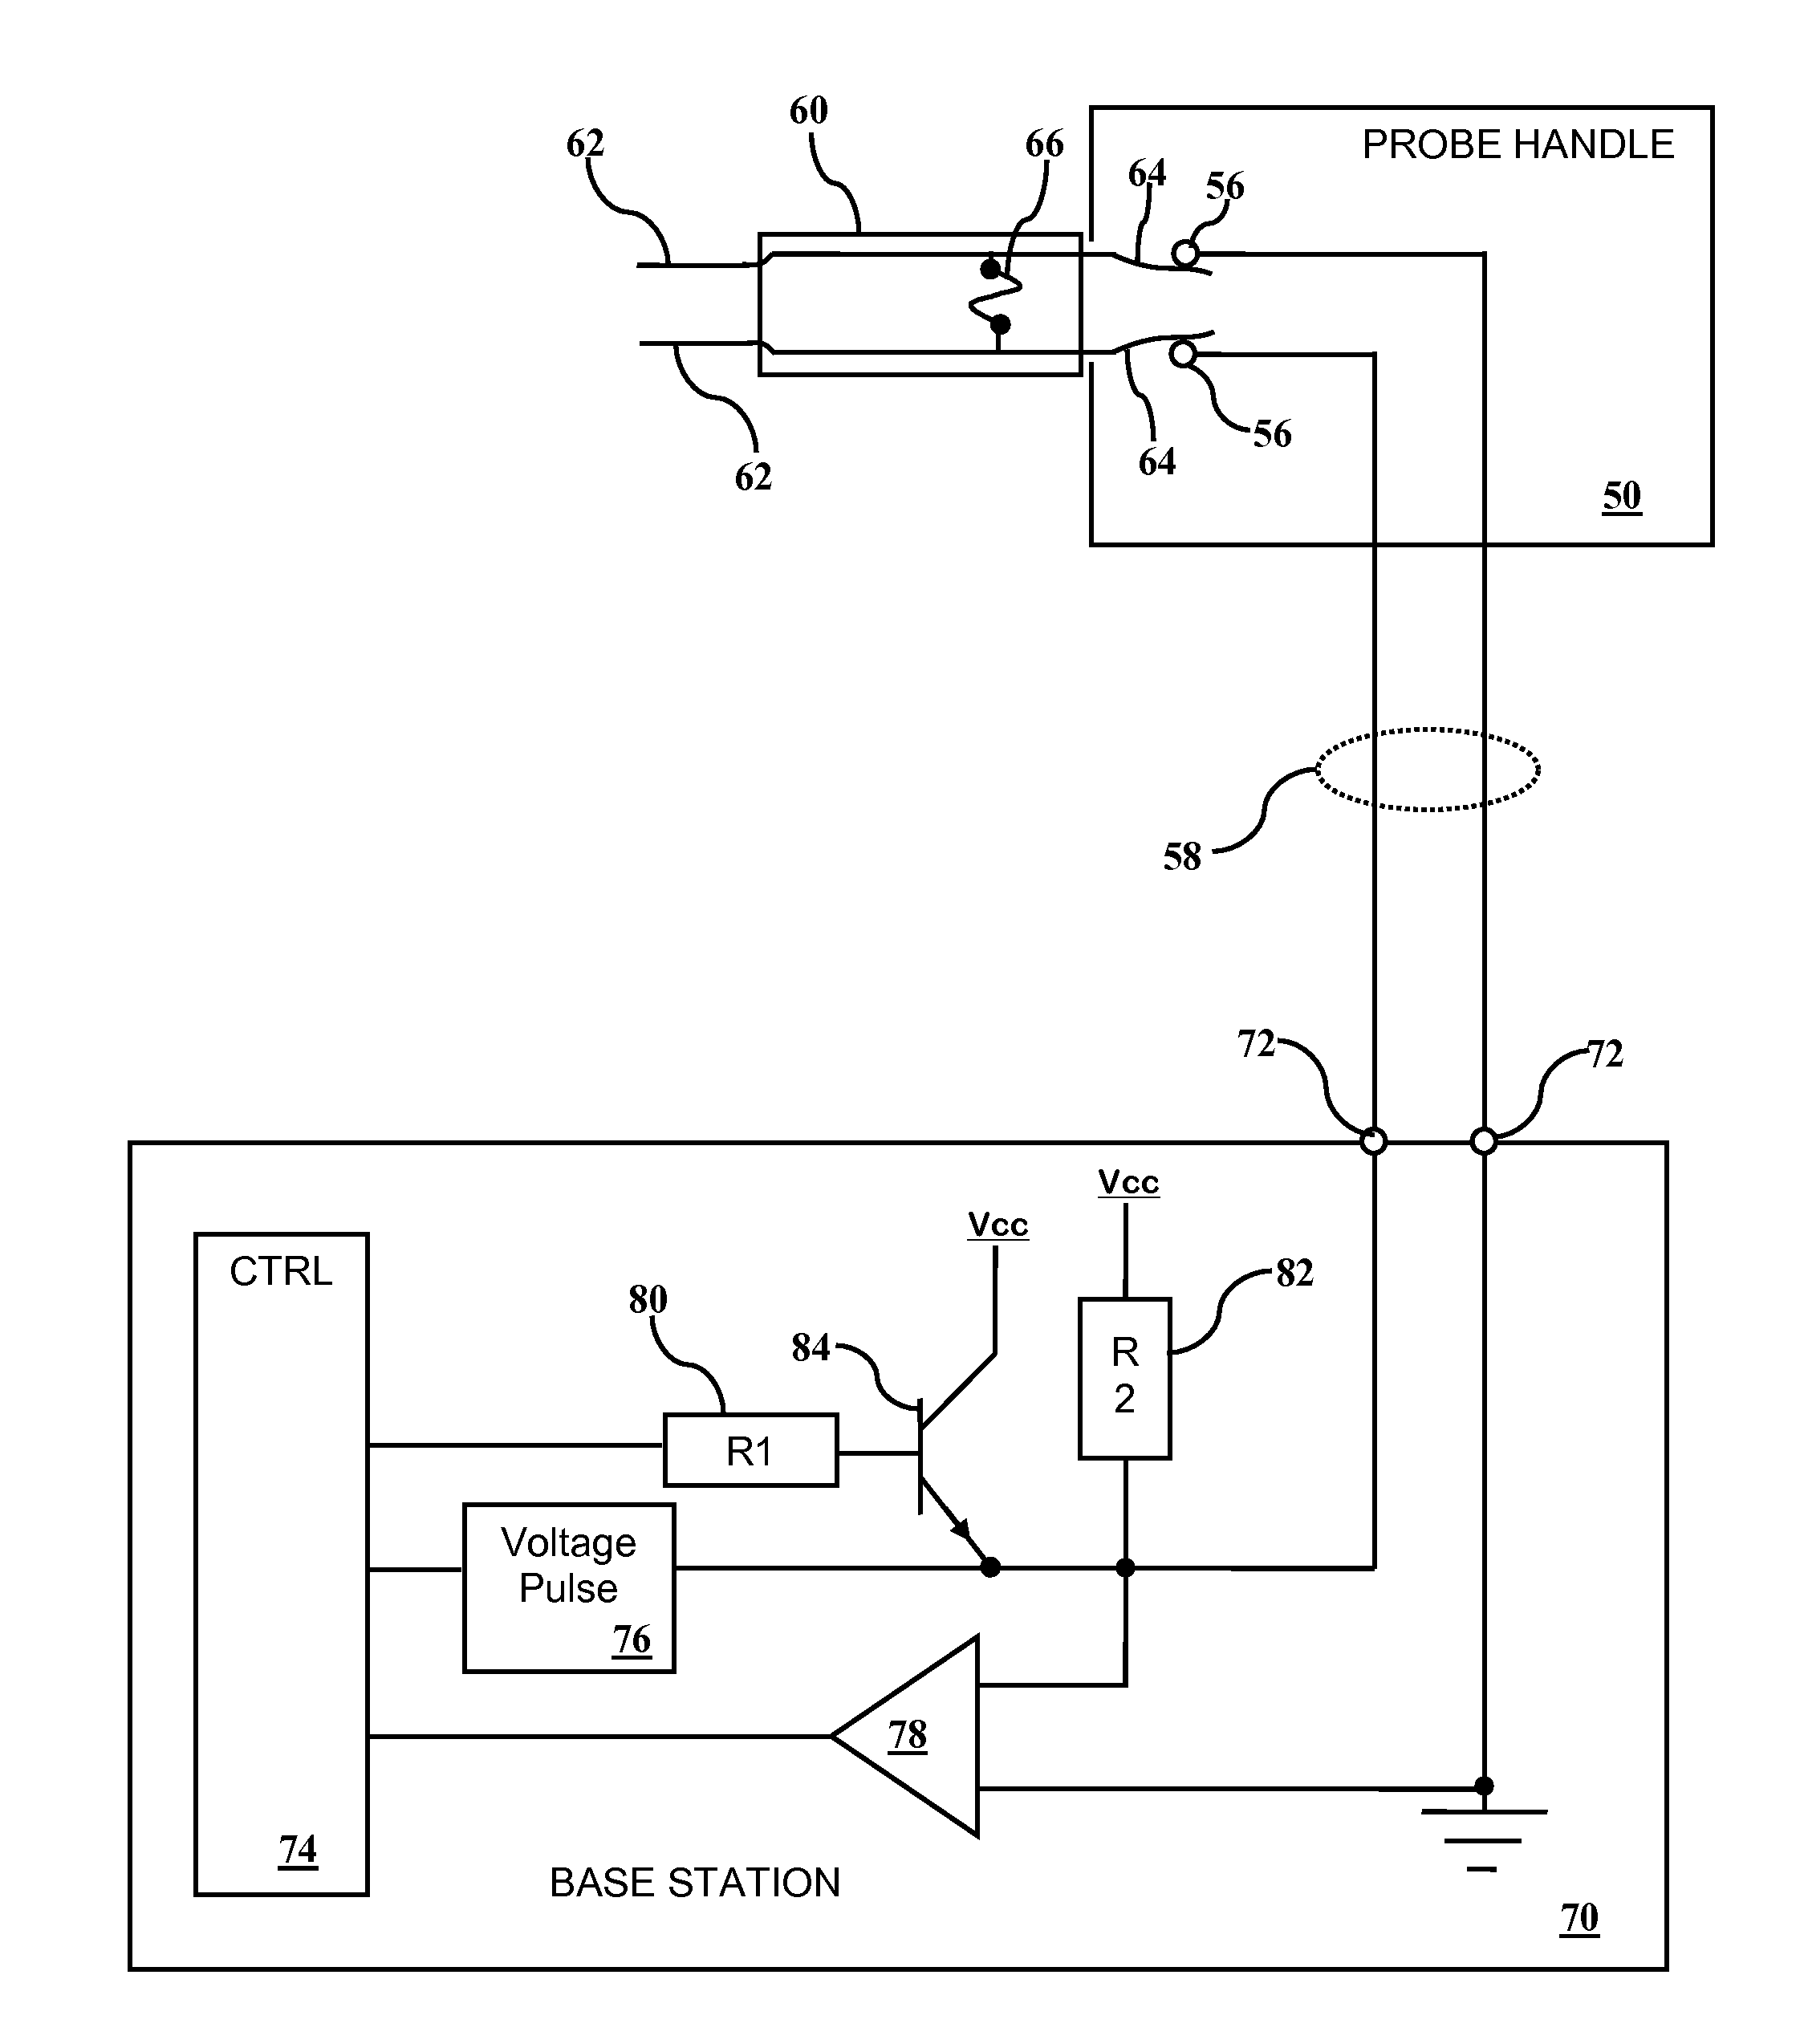 System, method and apparatus for preventing reuse of medical instruments